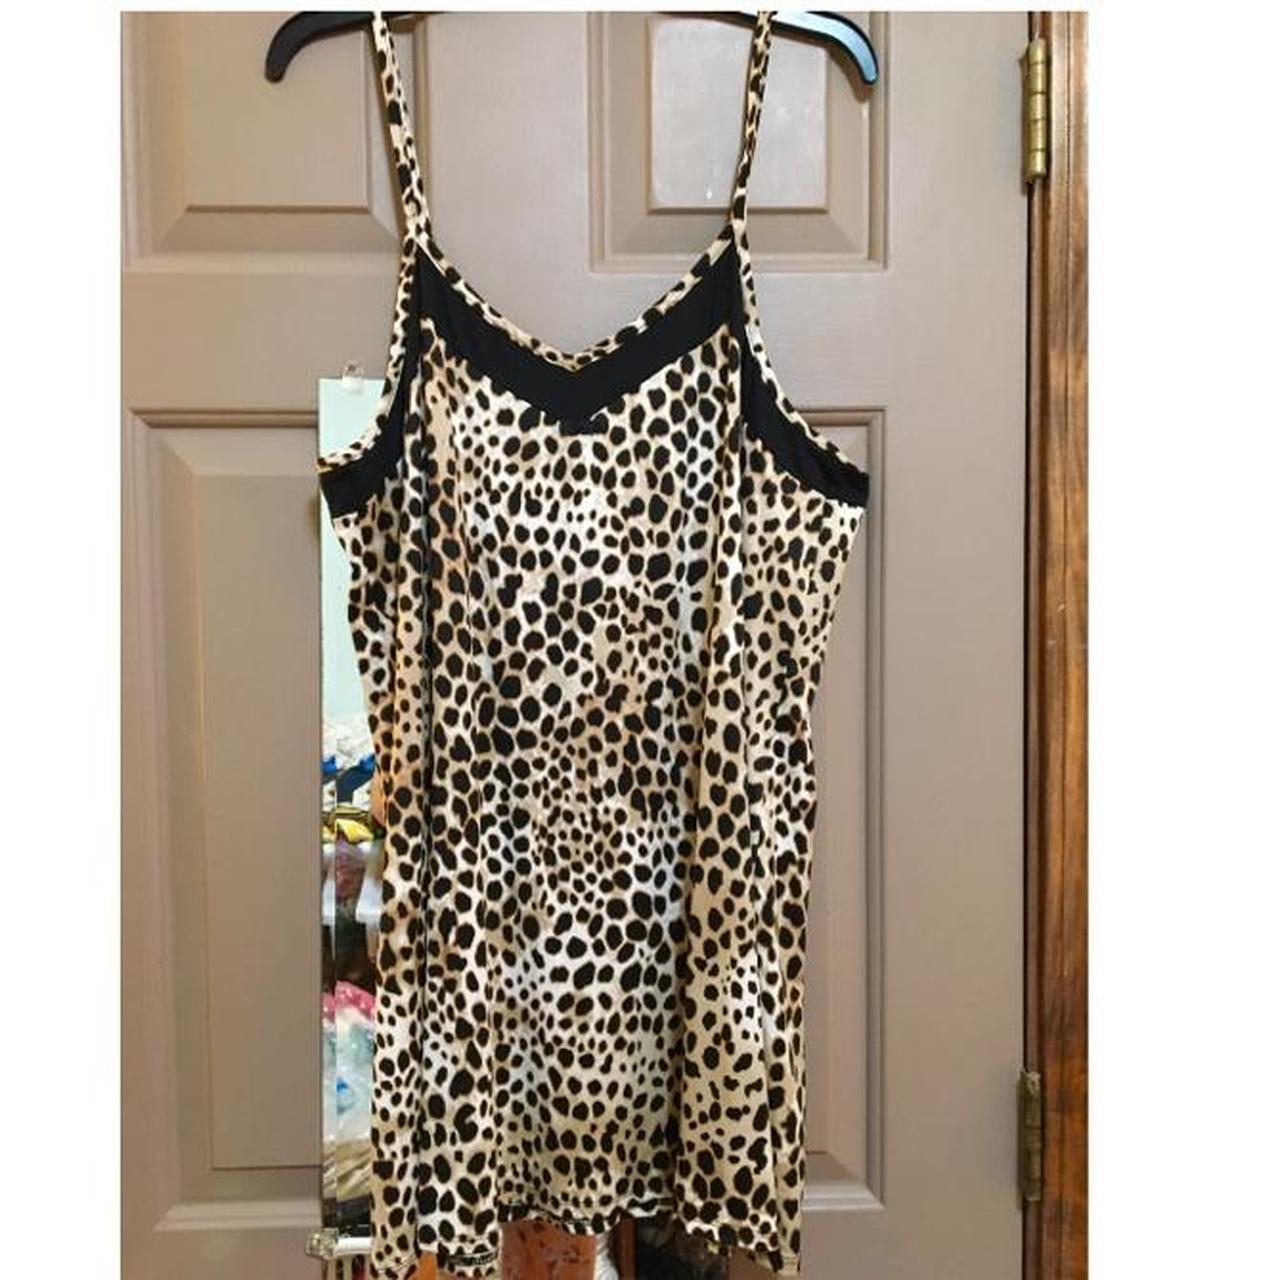 Product Image 2 - NWTs Soft Spotted Leopard/Cheetah Print